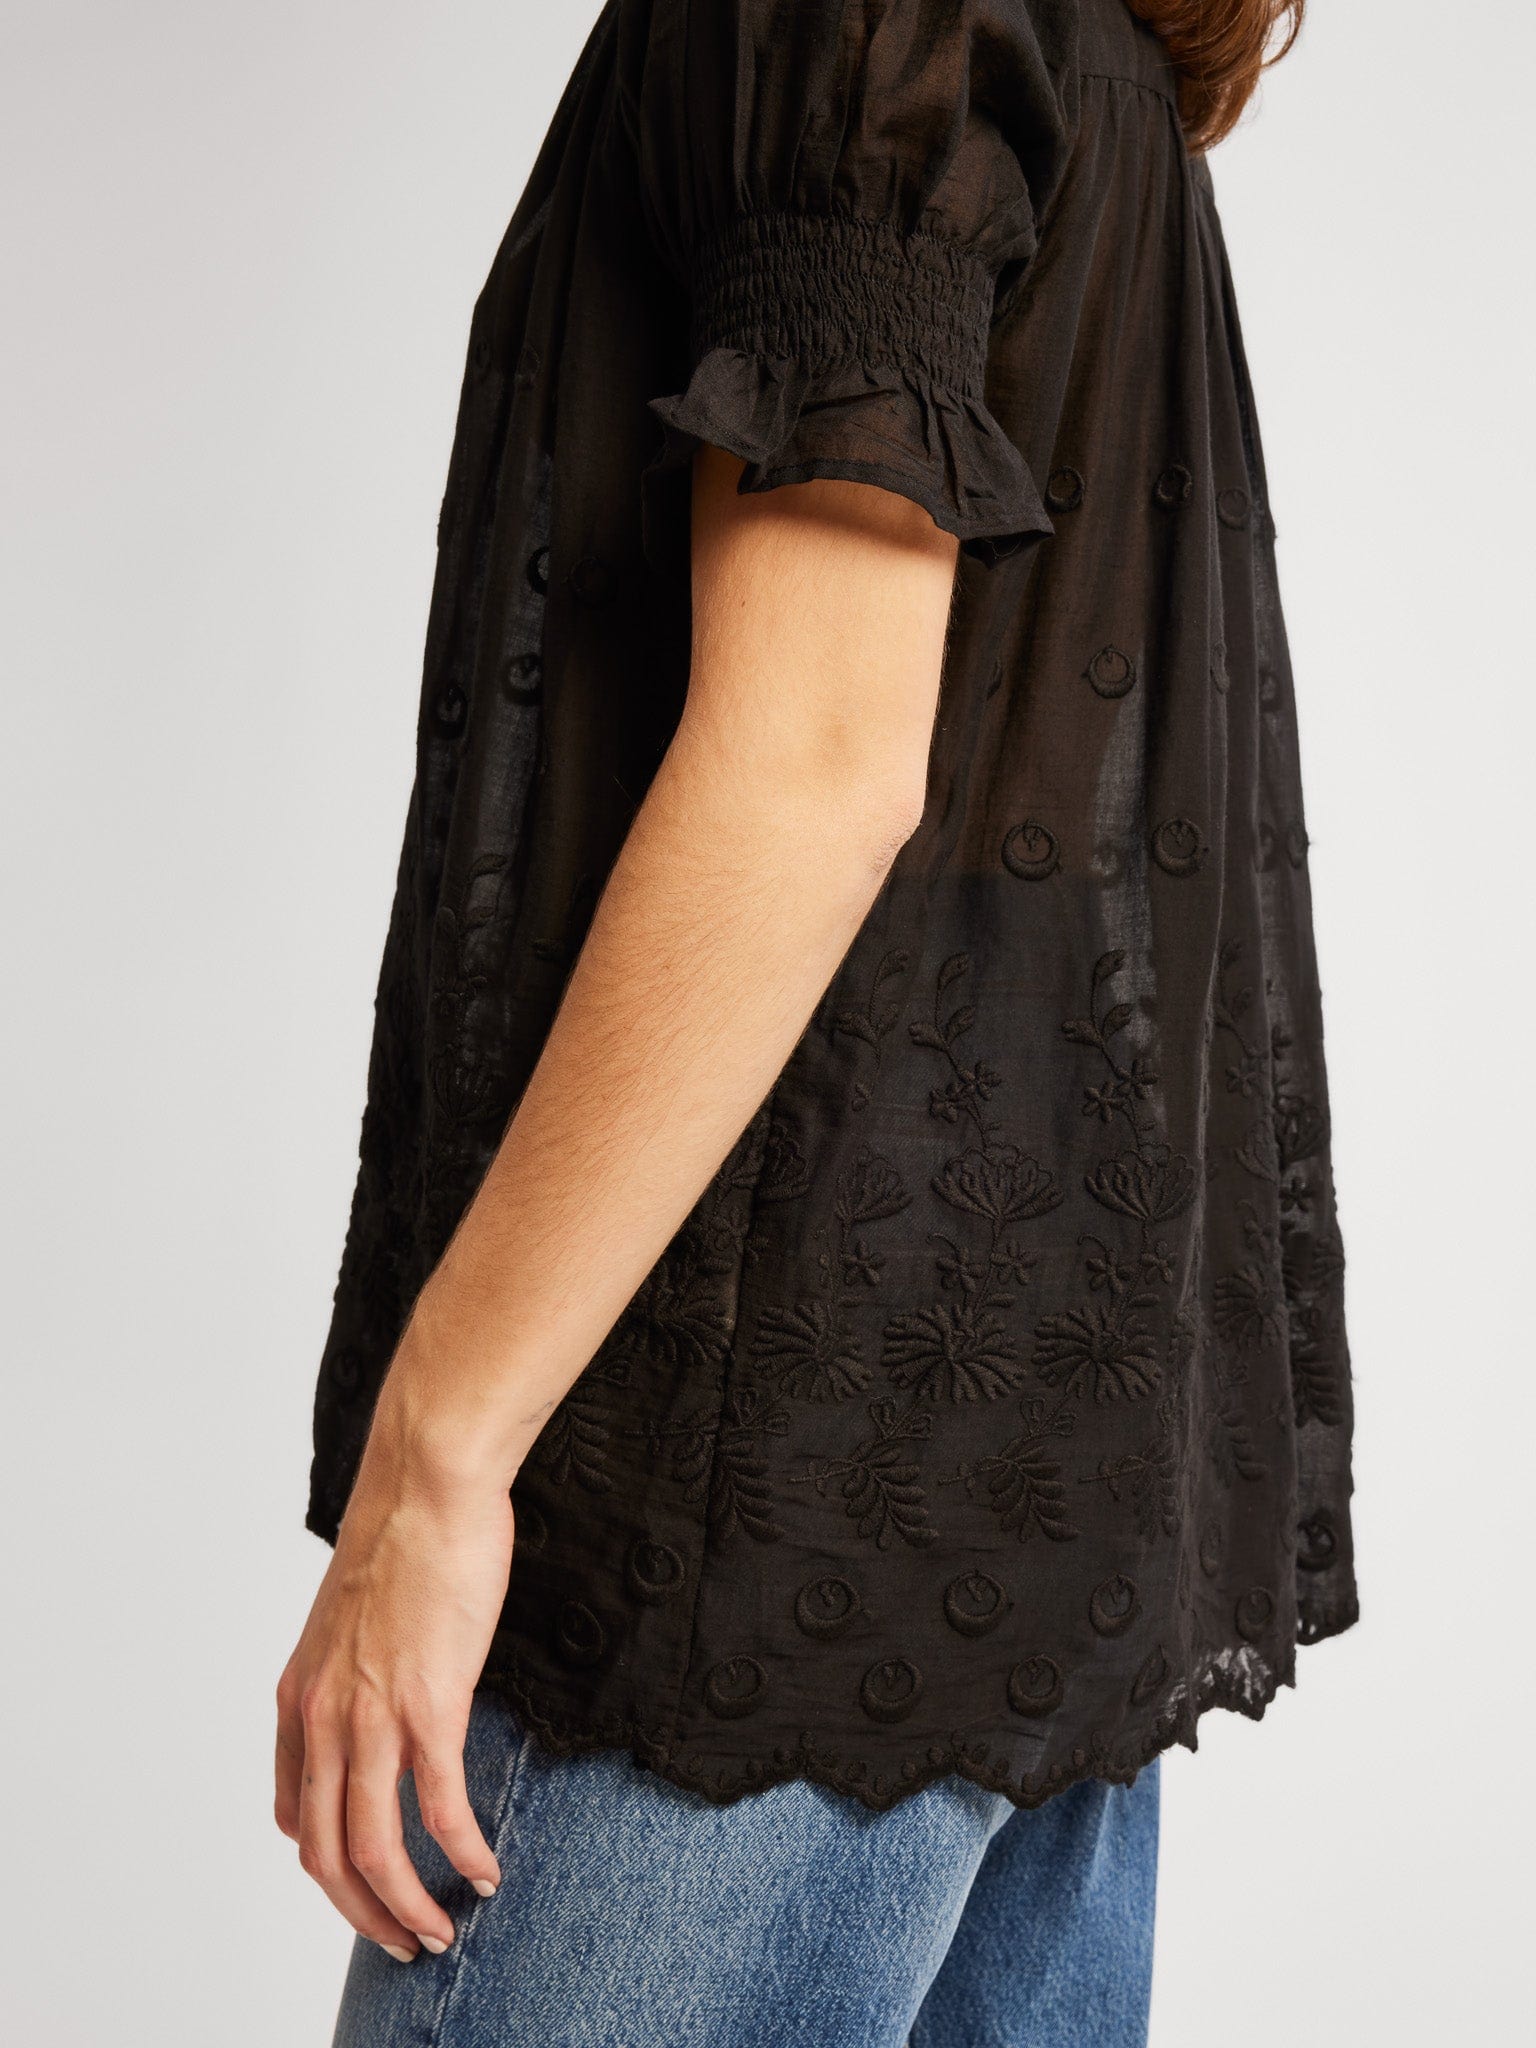 MILLE Clothing Marnie Top in Black Petal Embroidery